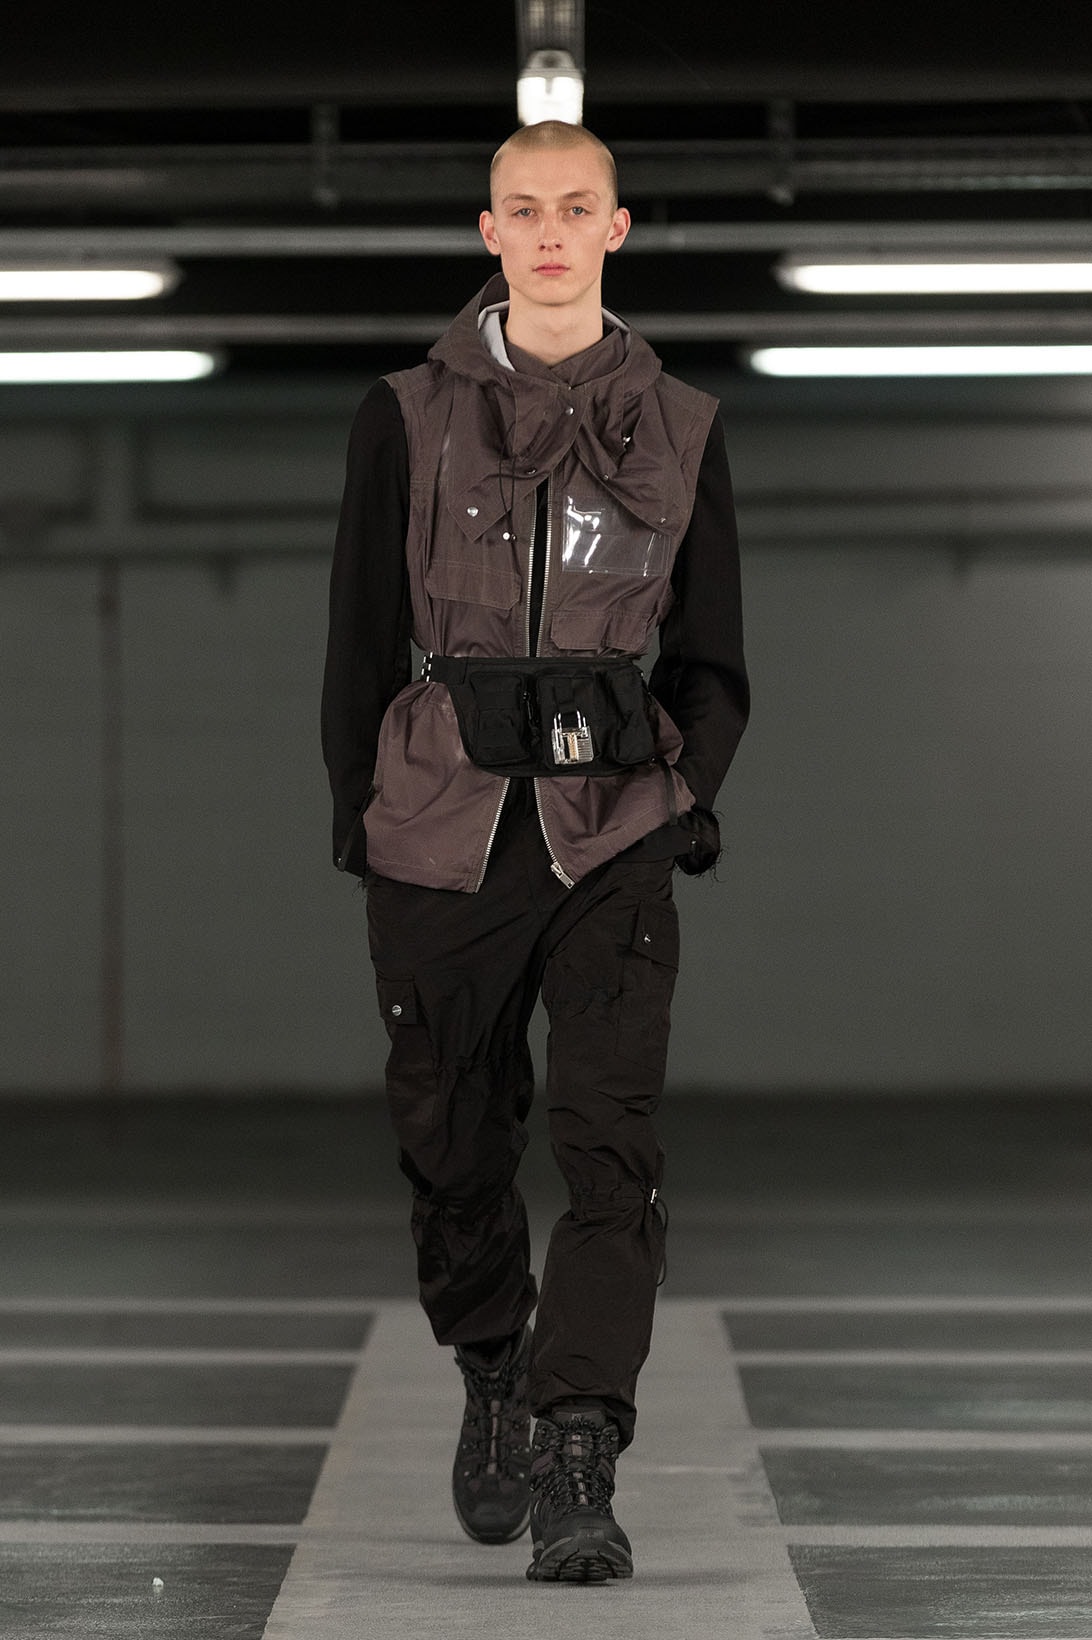 HELIOT EMIL 2018 Fall Winter Collection Runway INTENDED CONSEQUENCES juul brothers julius victor copenhagen